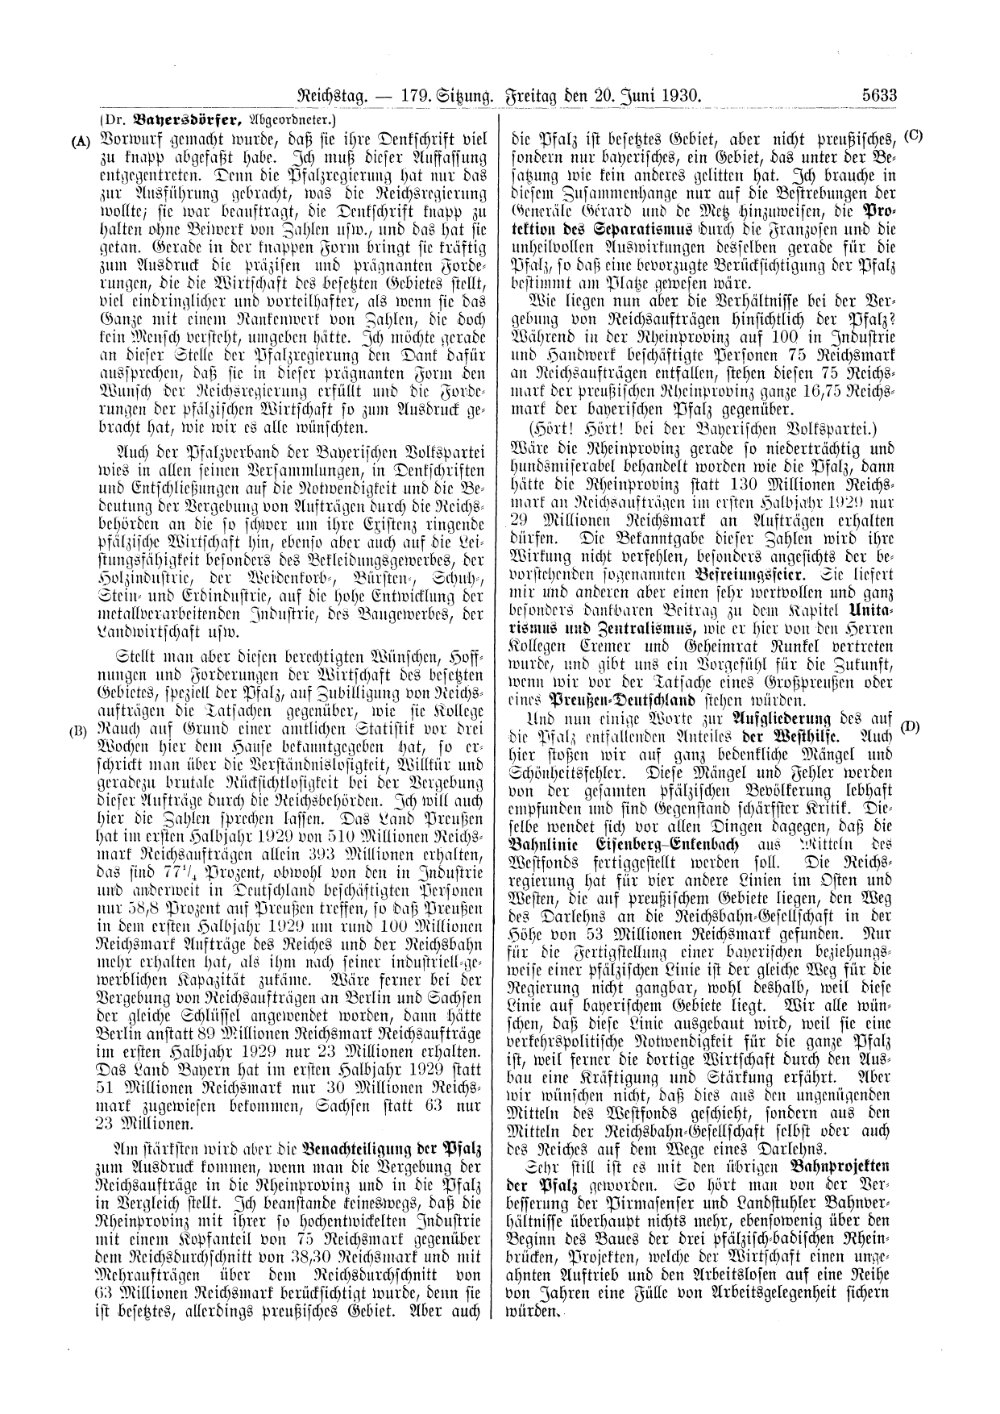 Scan of page 5633